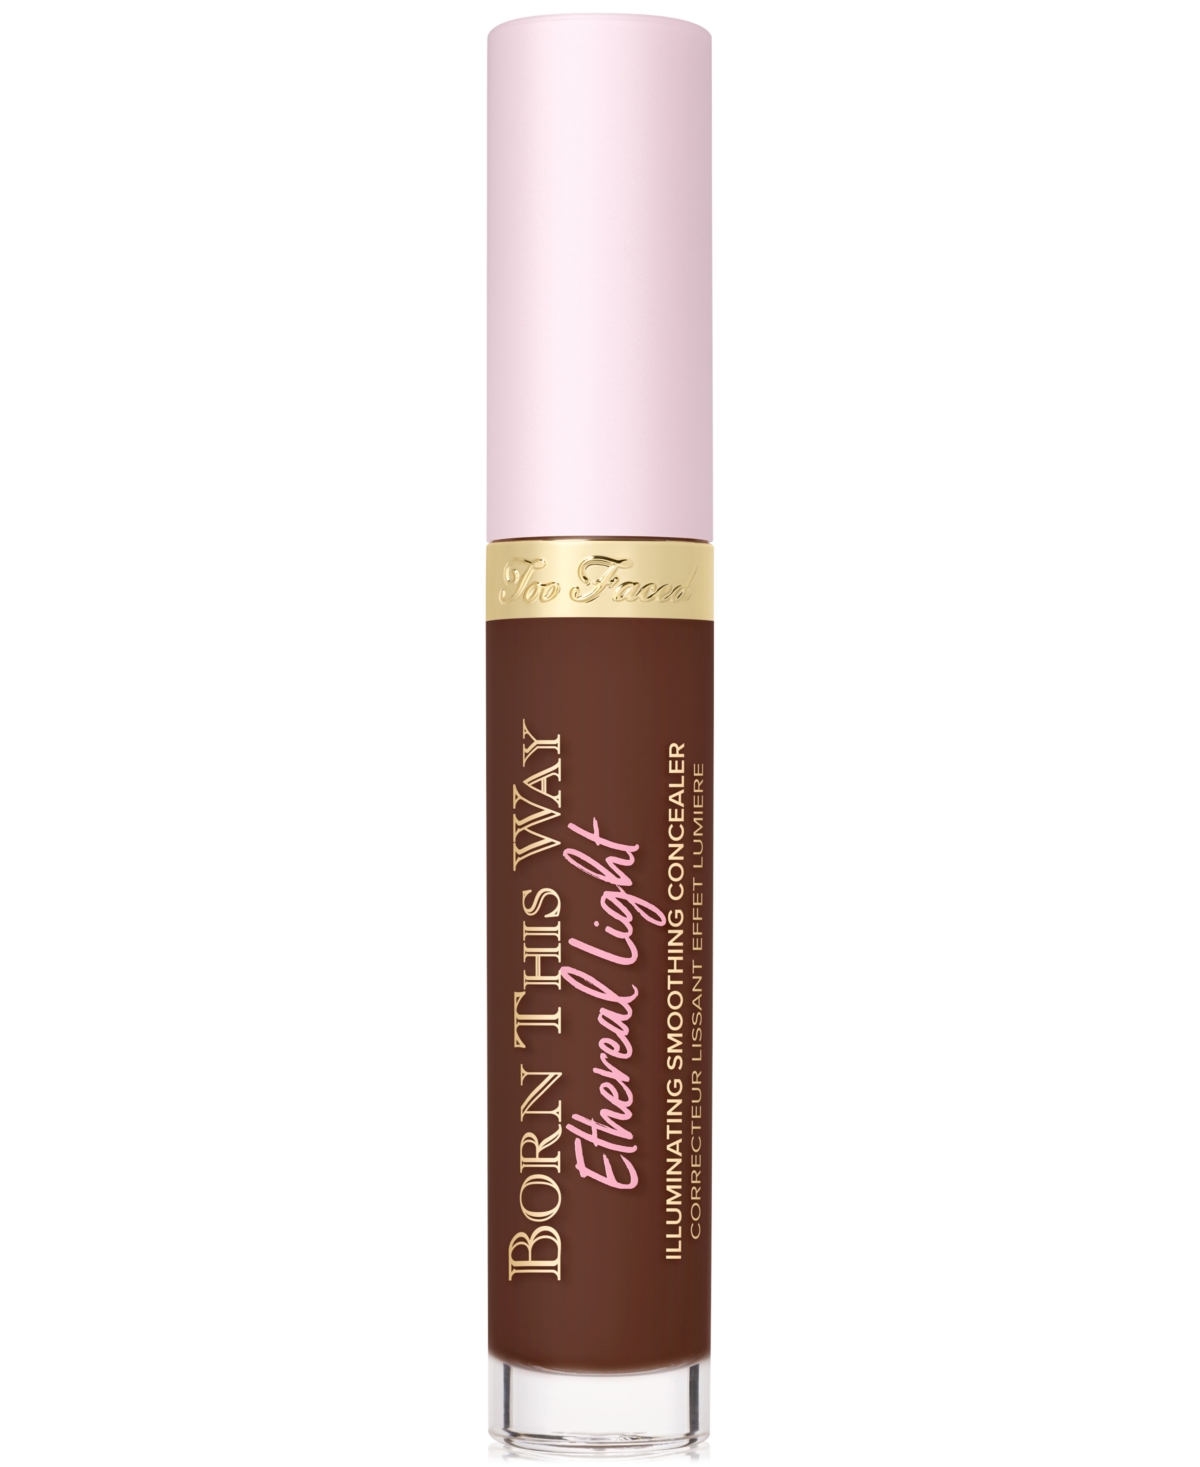 Too Faced Born This Way Ethereal Light Illuminating Smoothing Concealer In Espresso - Deepest With Rosy Undertones